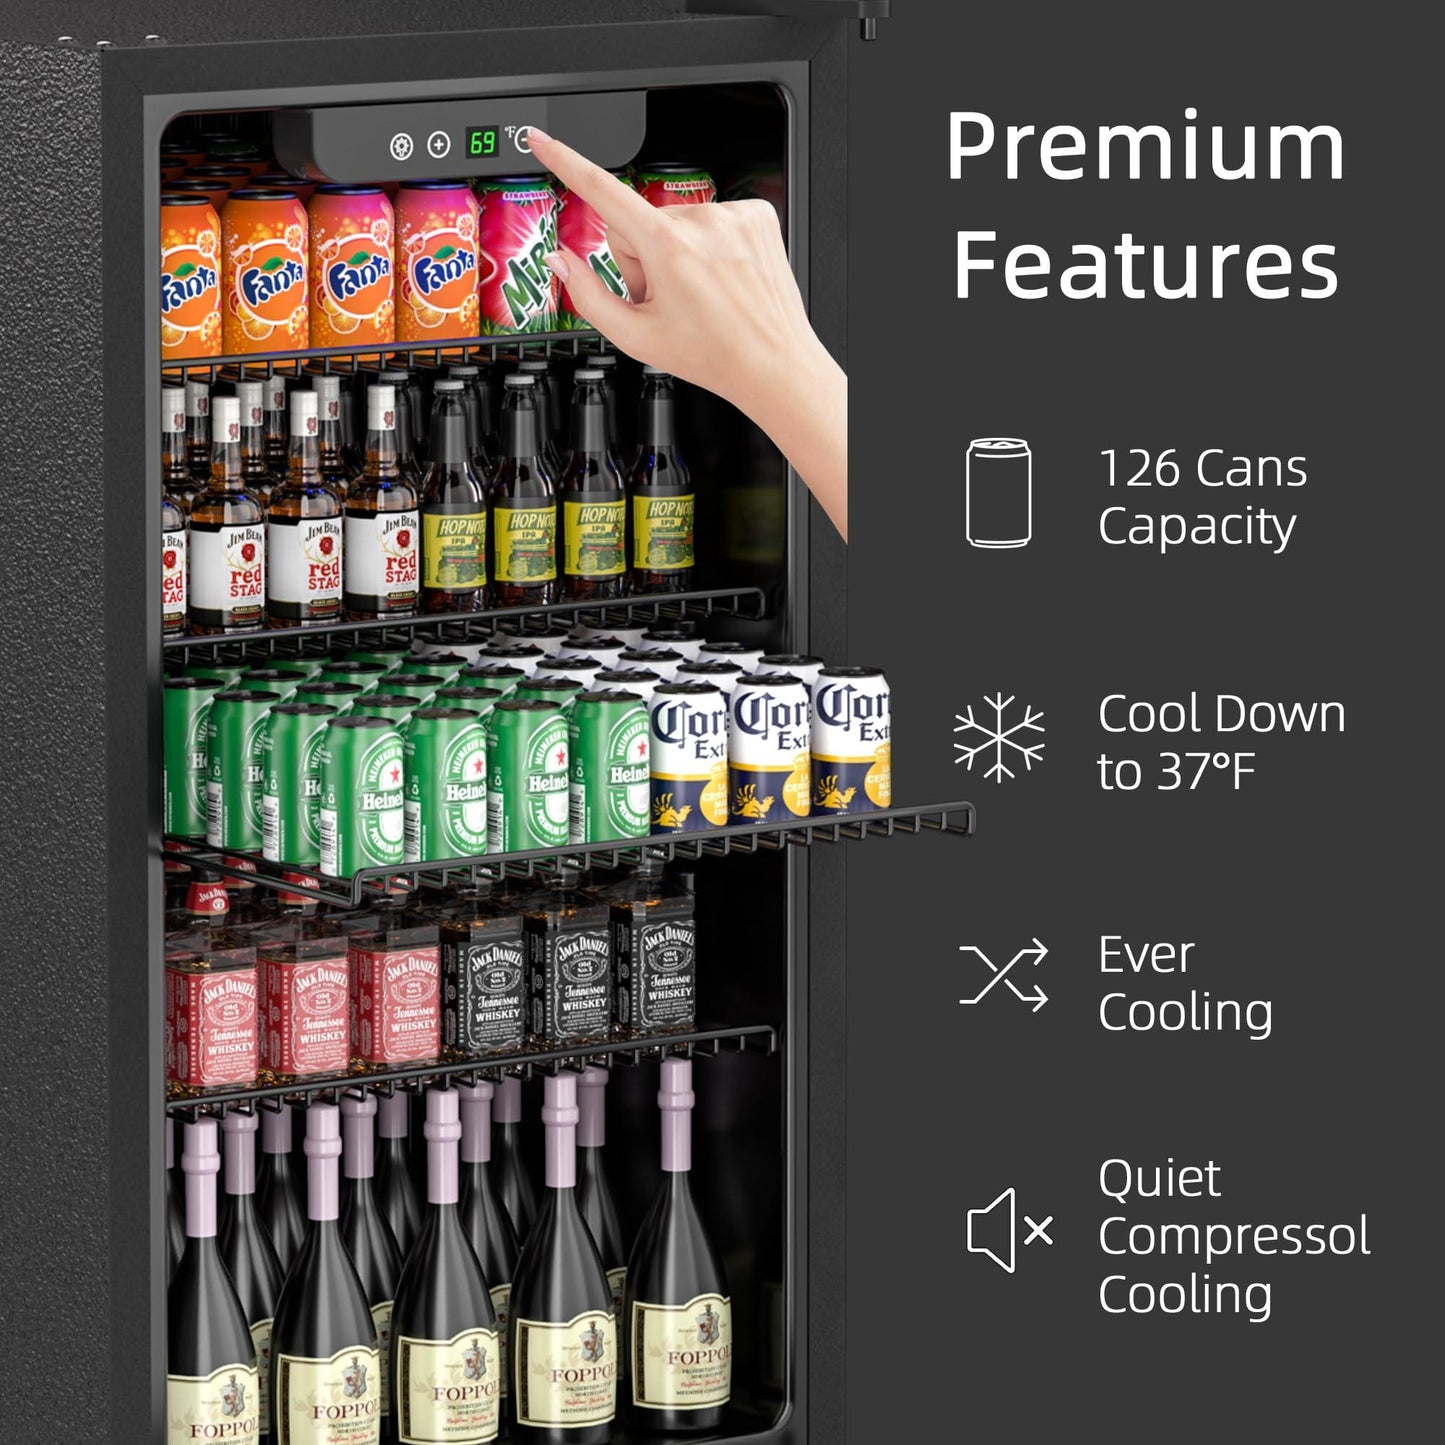 Erivess Compact Freestanding Beverage Refrigerator,126 Can Mini Fridge with Glass Front Door for Soda, Beer, or Wine, Under Counter Drink Dispenser with Adjustable Shelves and Digital Display - CookCave